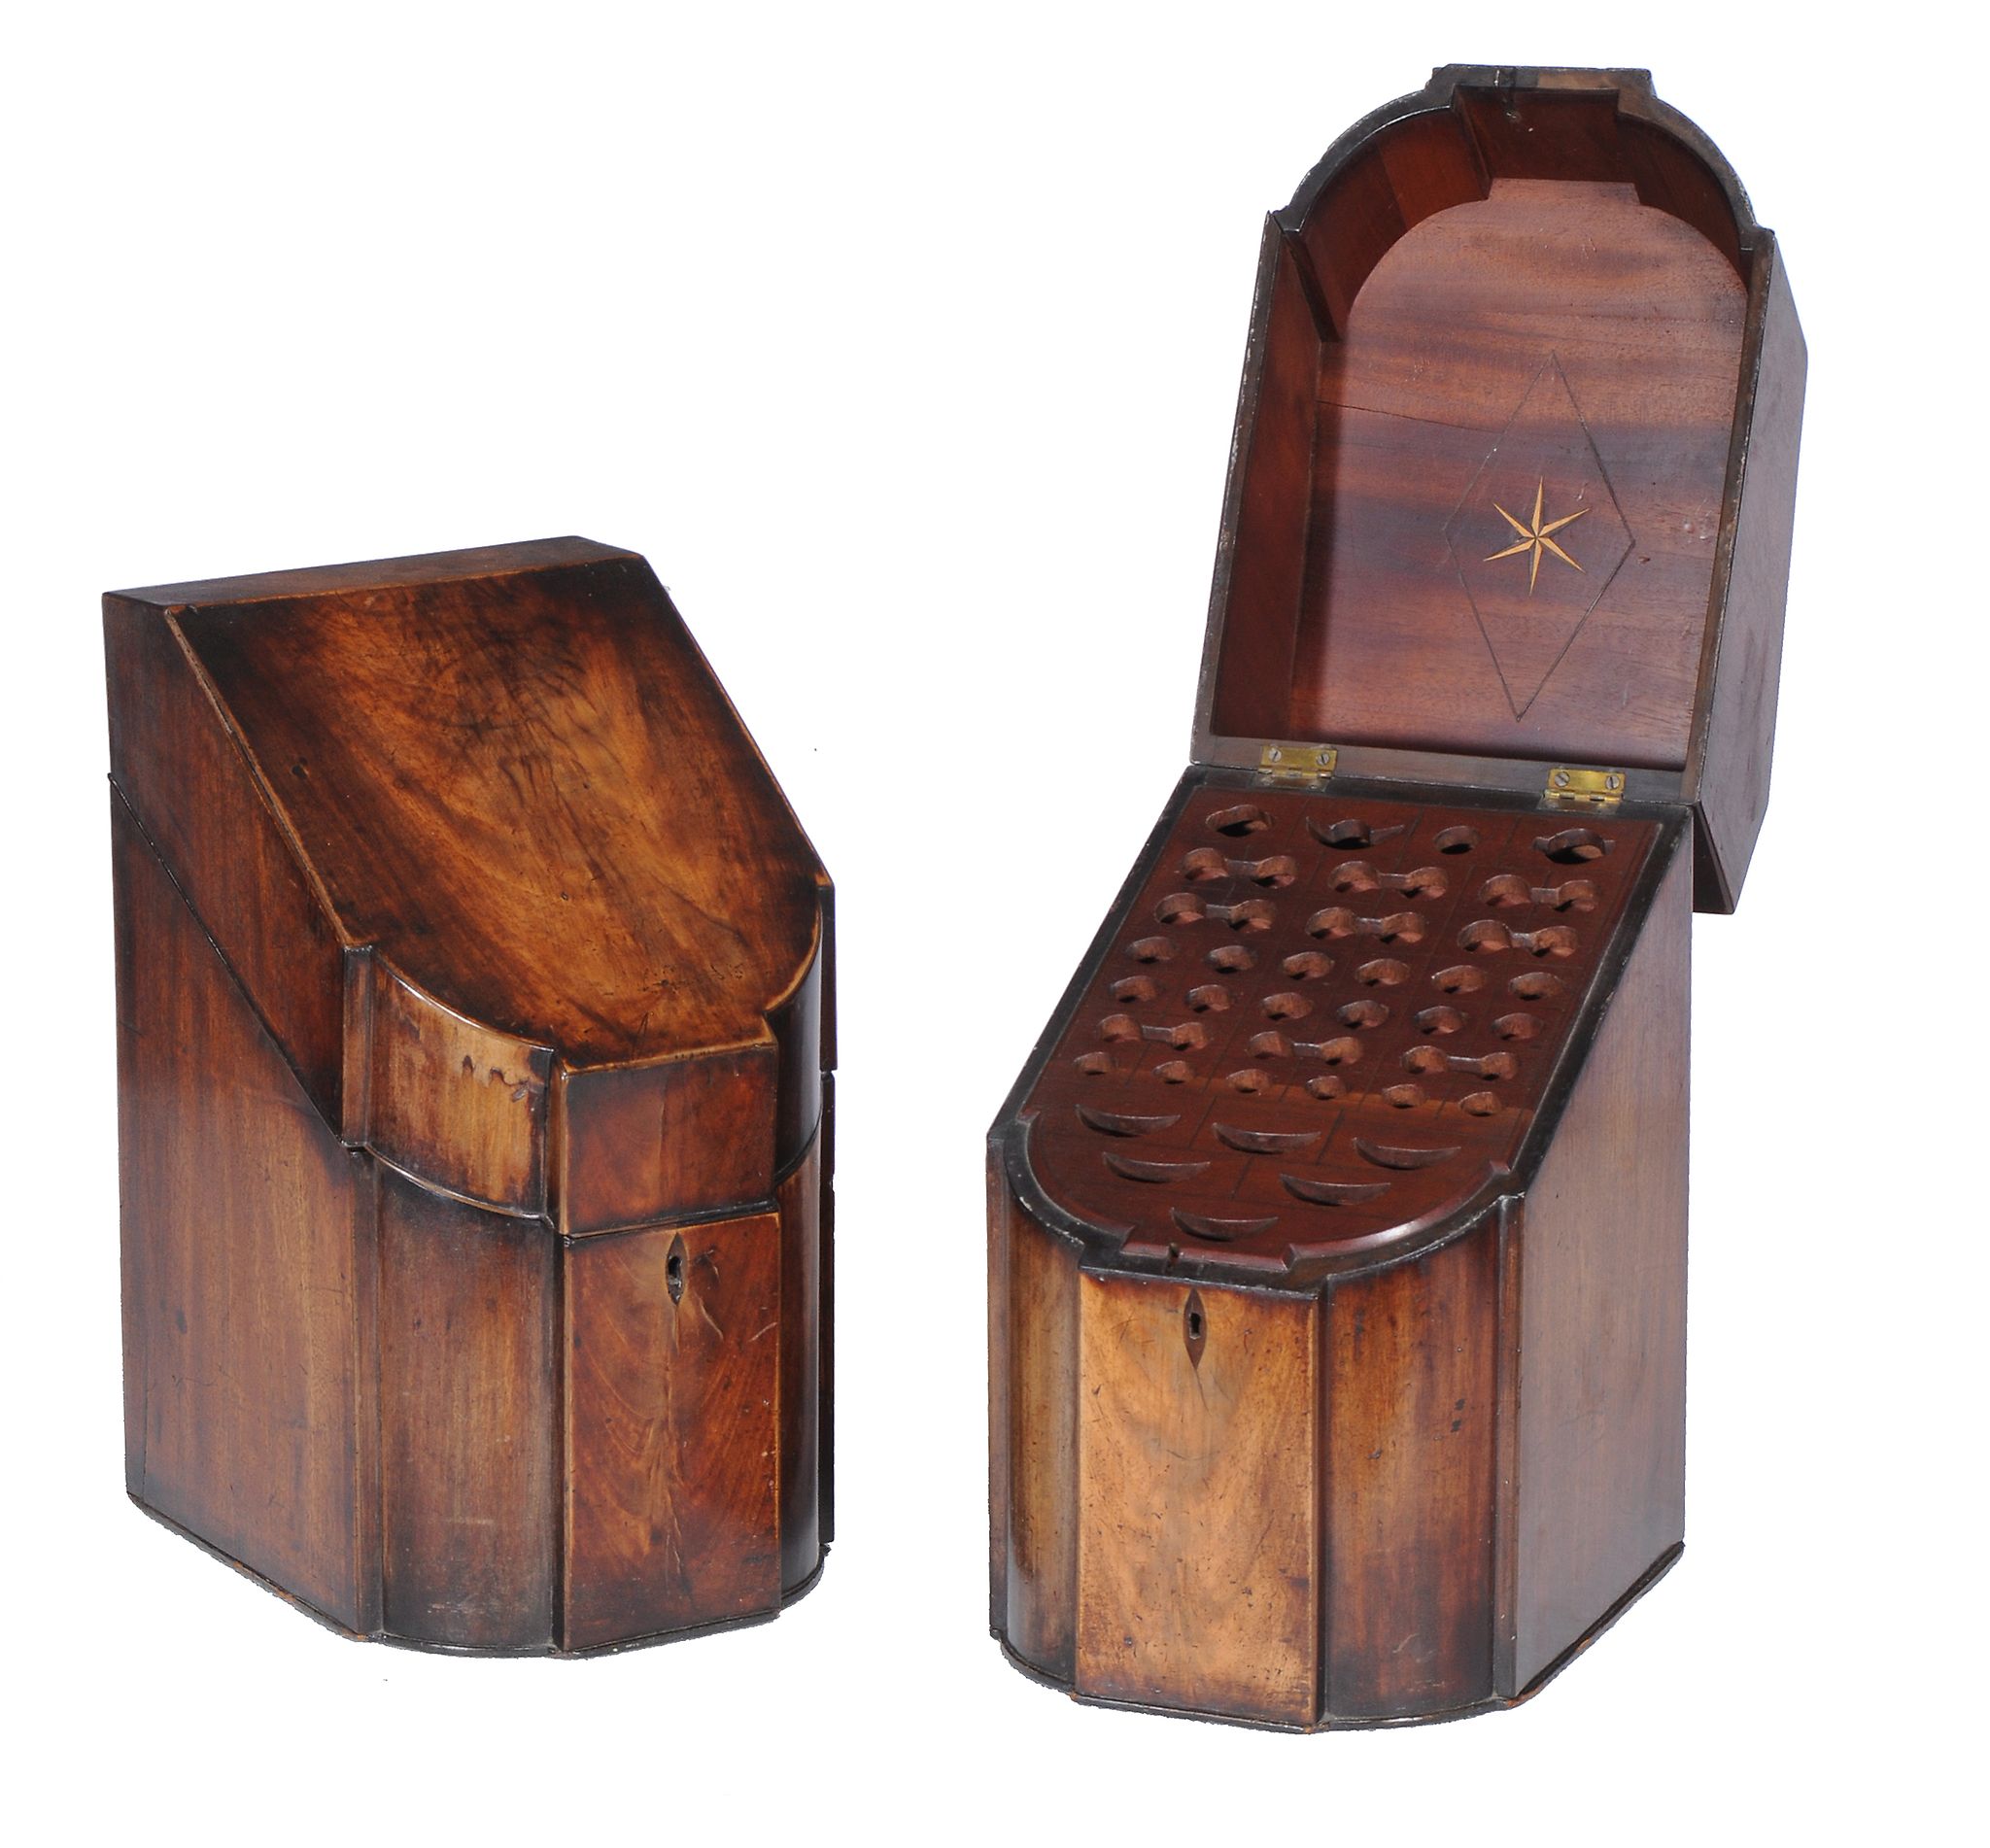 A pair of George III mahogany knife boxes, late 18th century, one with interior with holes for